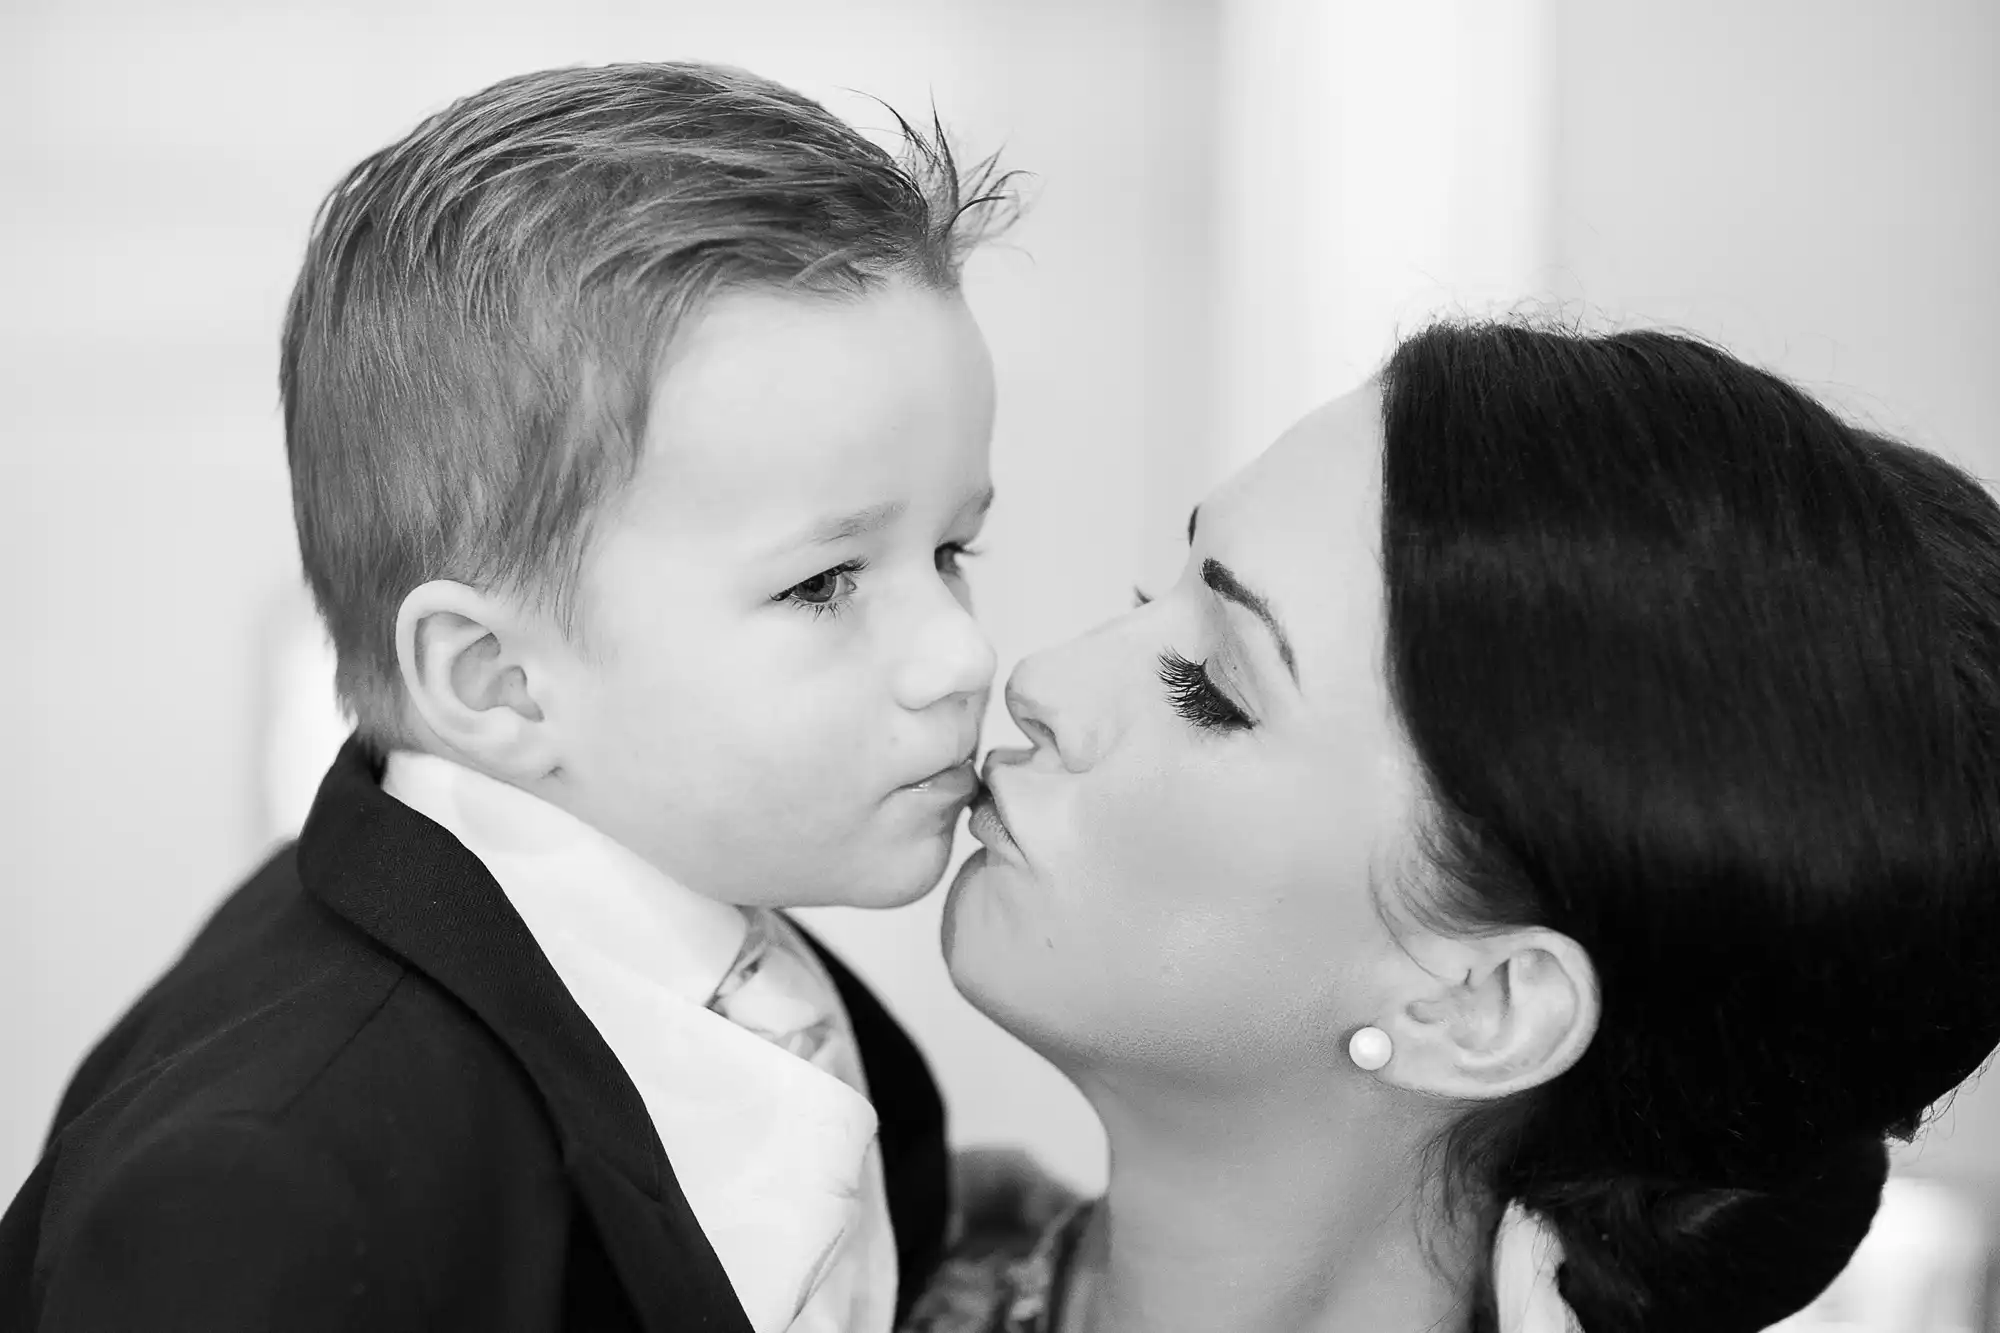 A black and white photo of a young boy in a suit receiving a kiss on the cheek from a woman with long eyelashes.